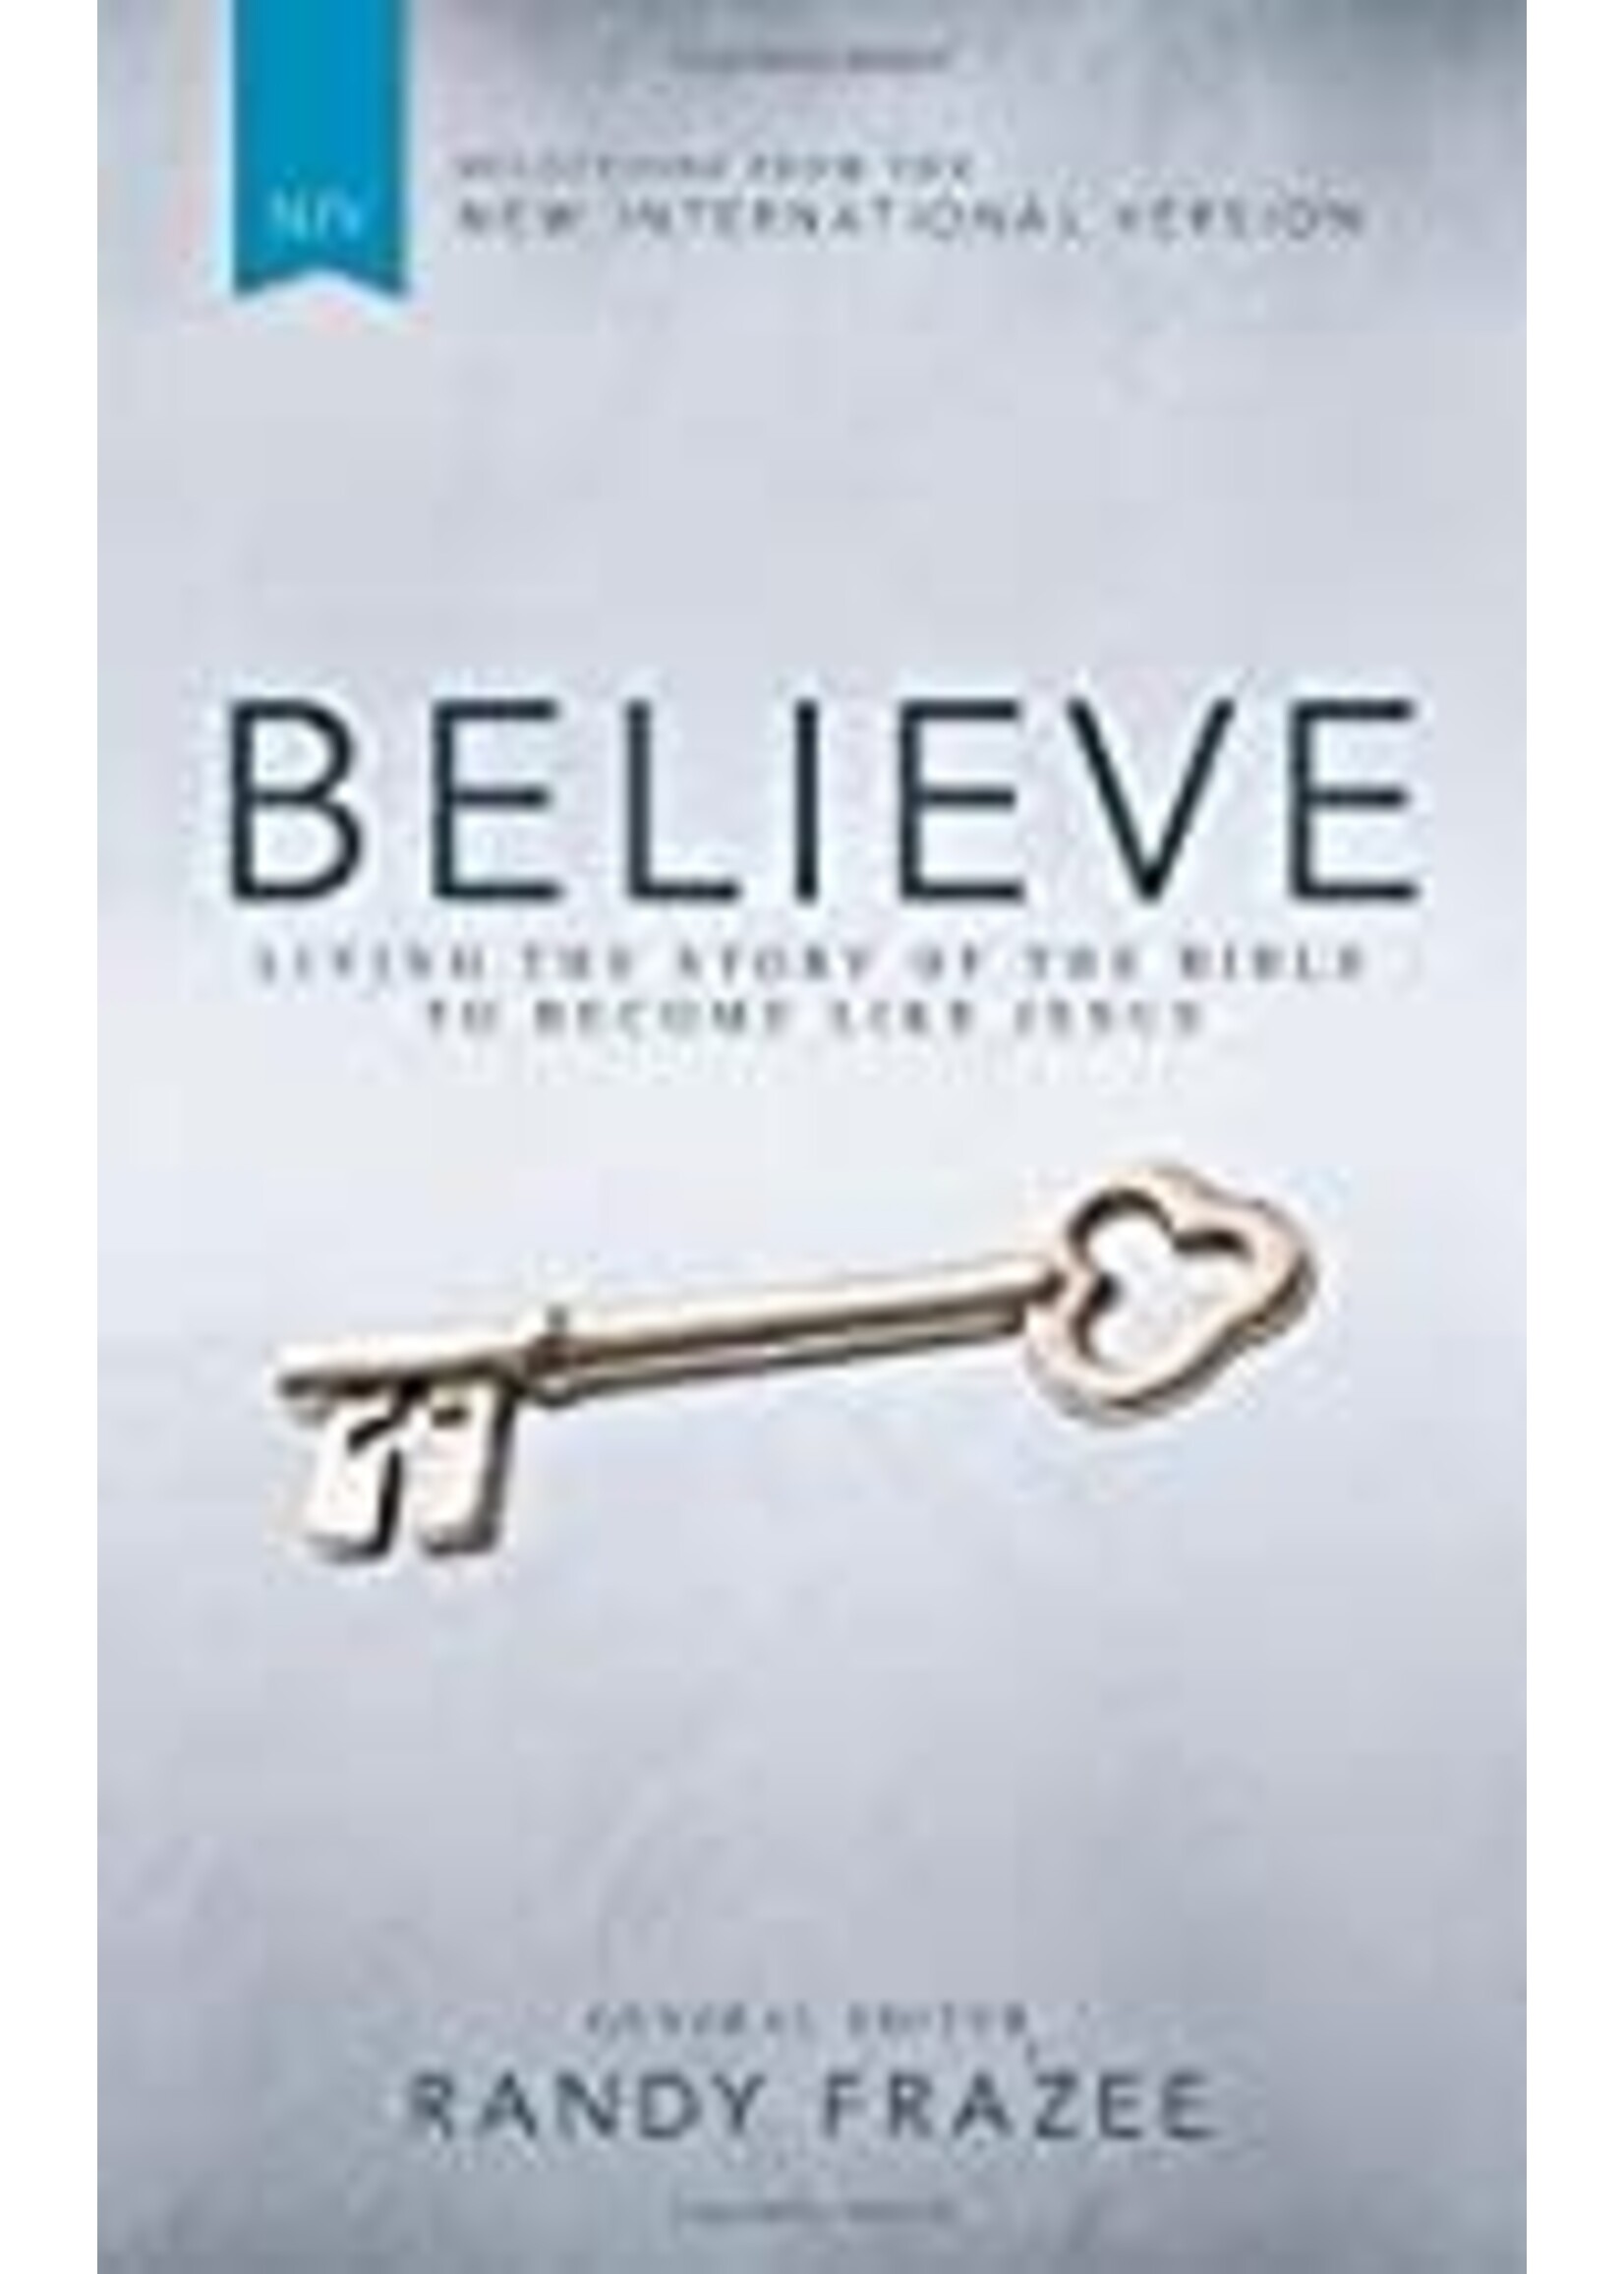 NKJV, Believe: Living the Story of the Bible to Become Like Jesus